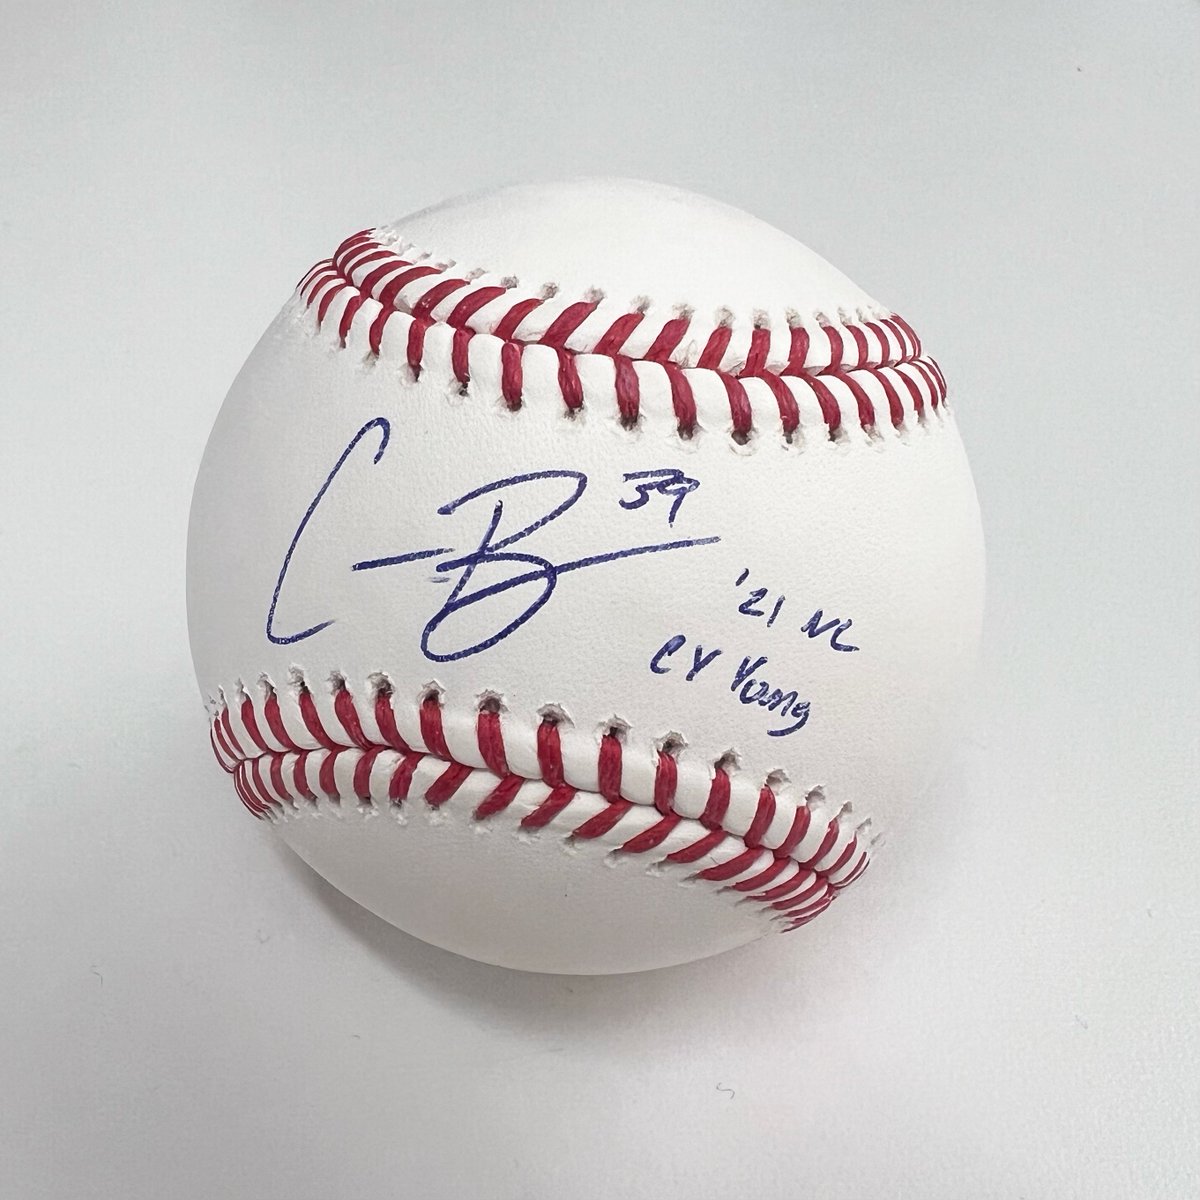 We're giving away a Corbin Burnes signed ball! Retweet and follow for a chance to win